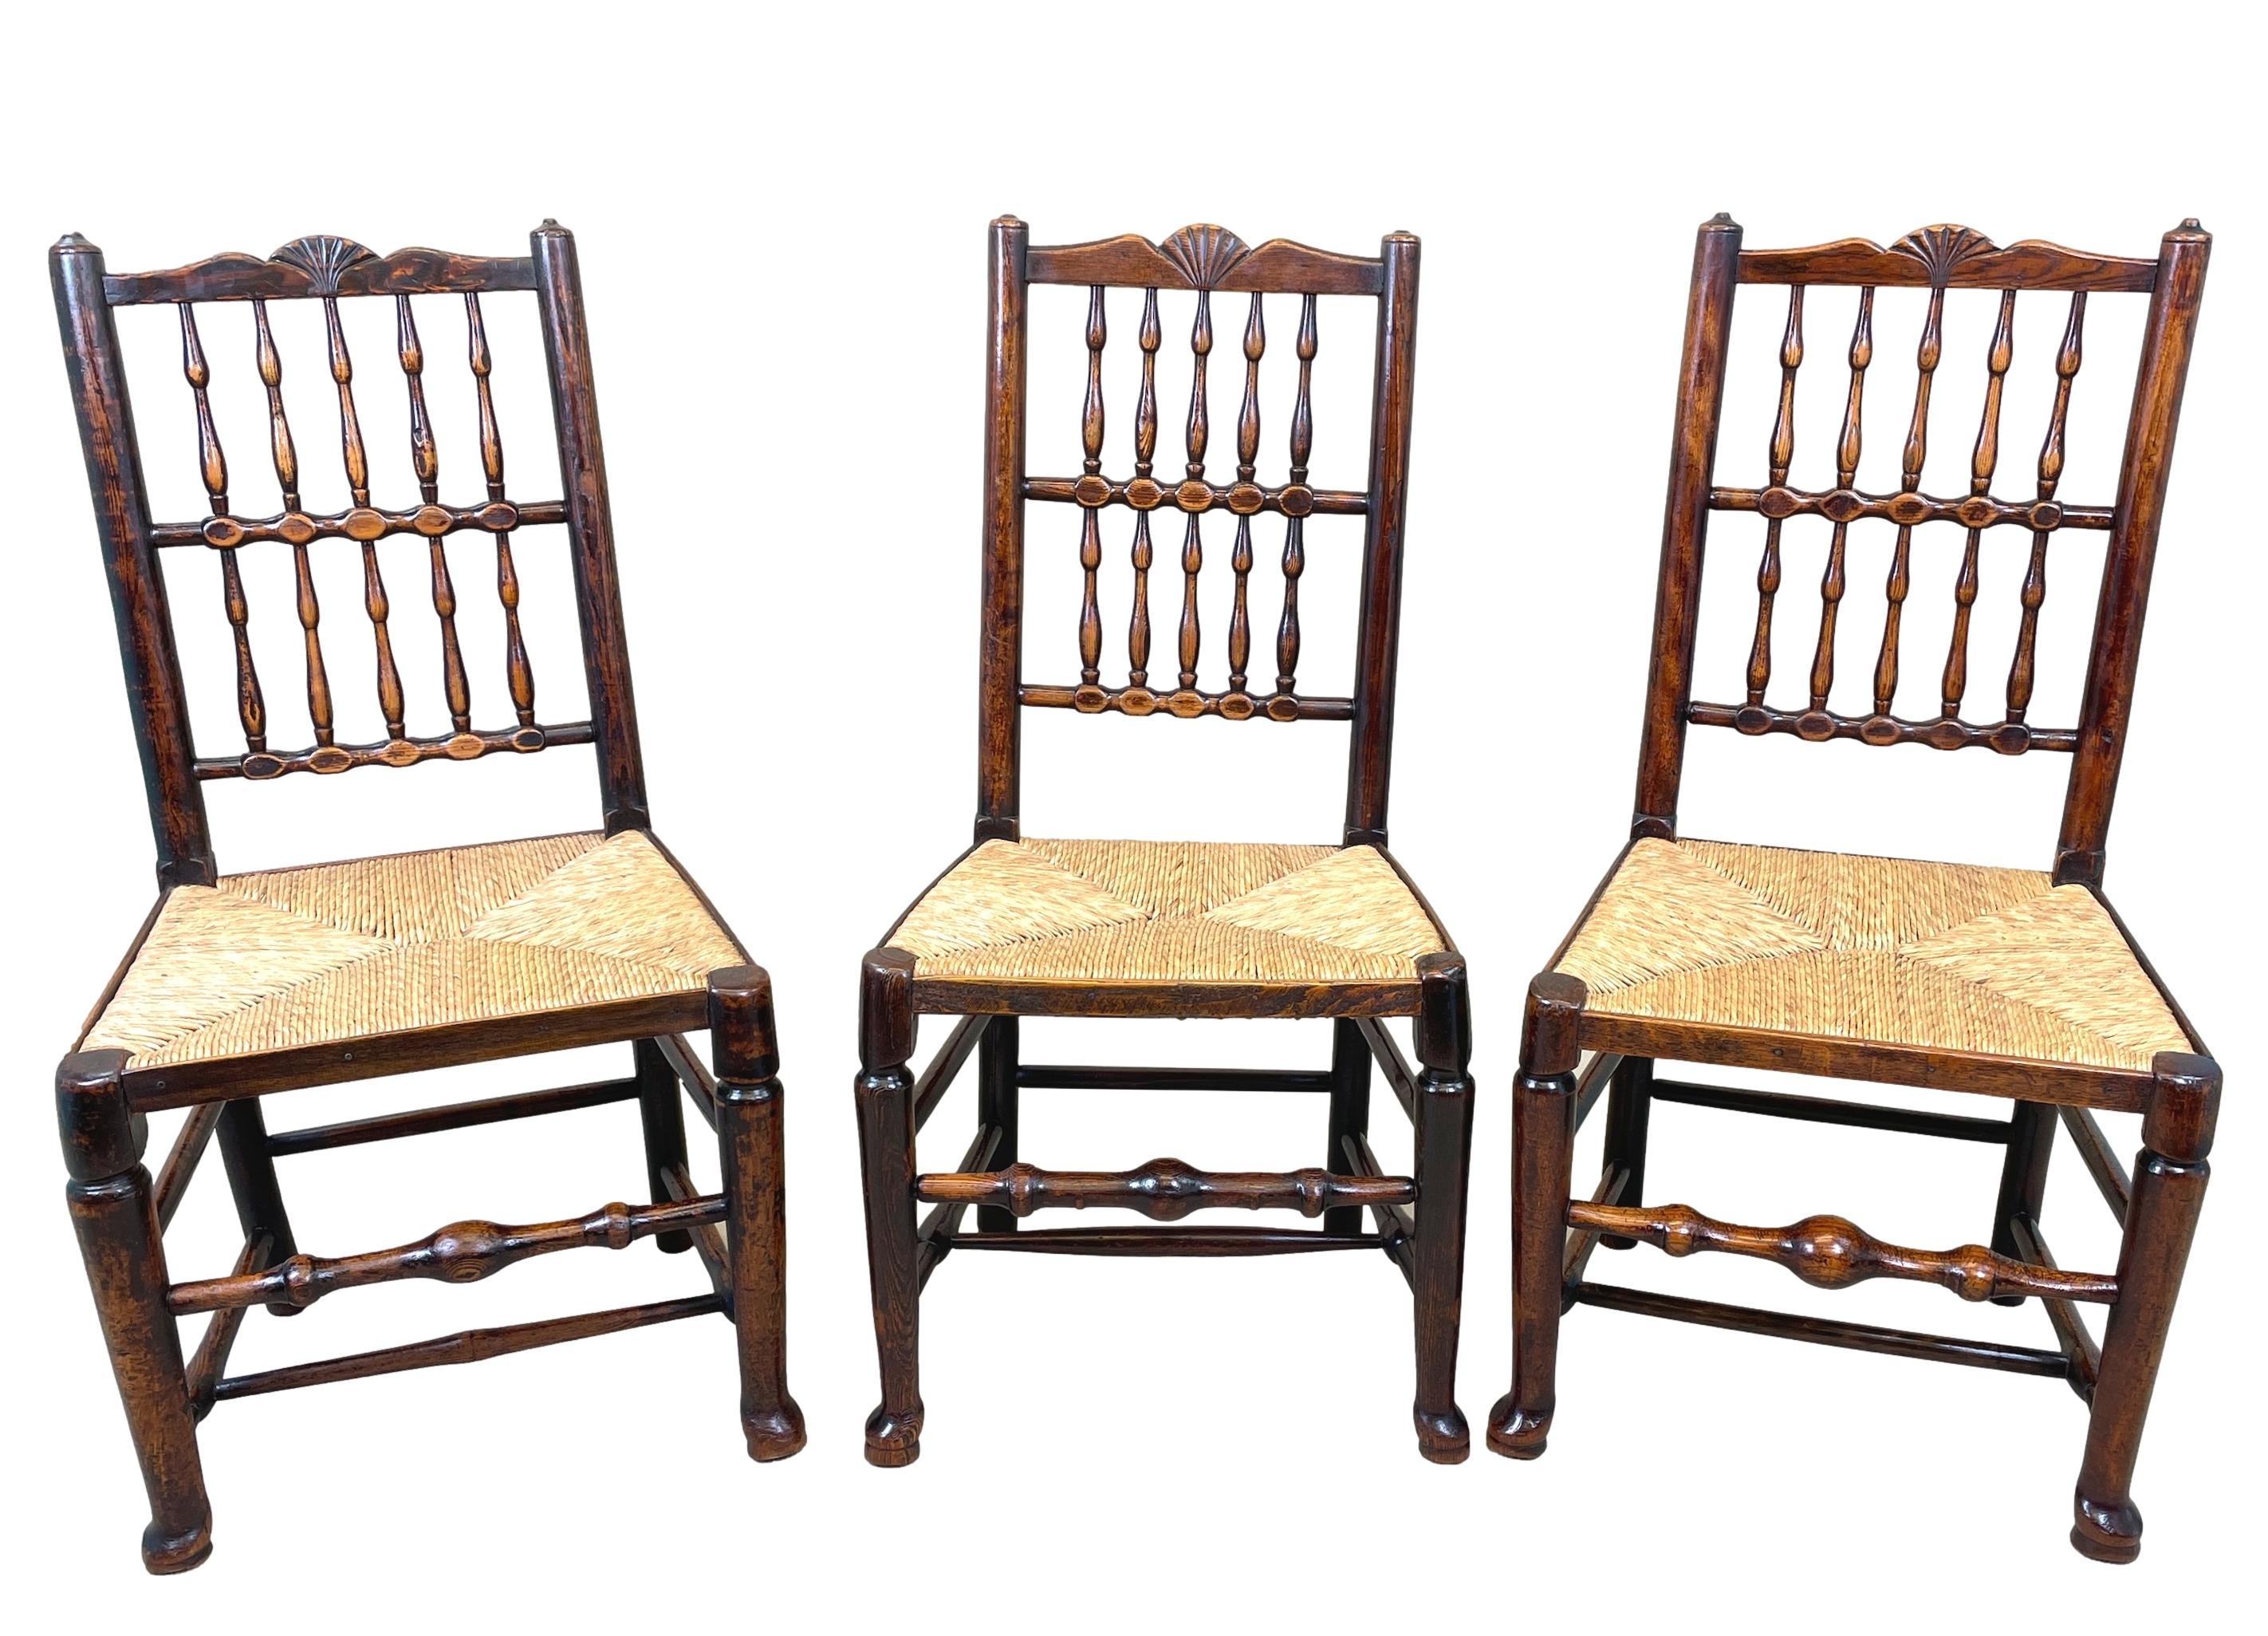 Set of 6 Early 19th Century Spindle Back Dining Chairs 2